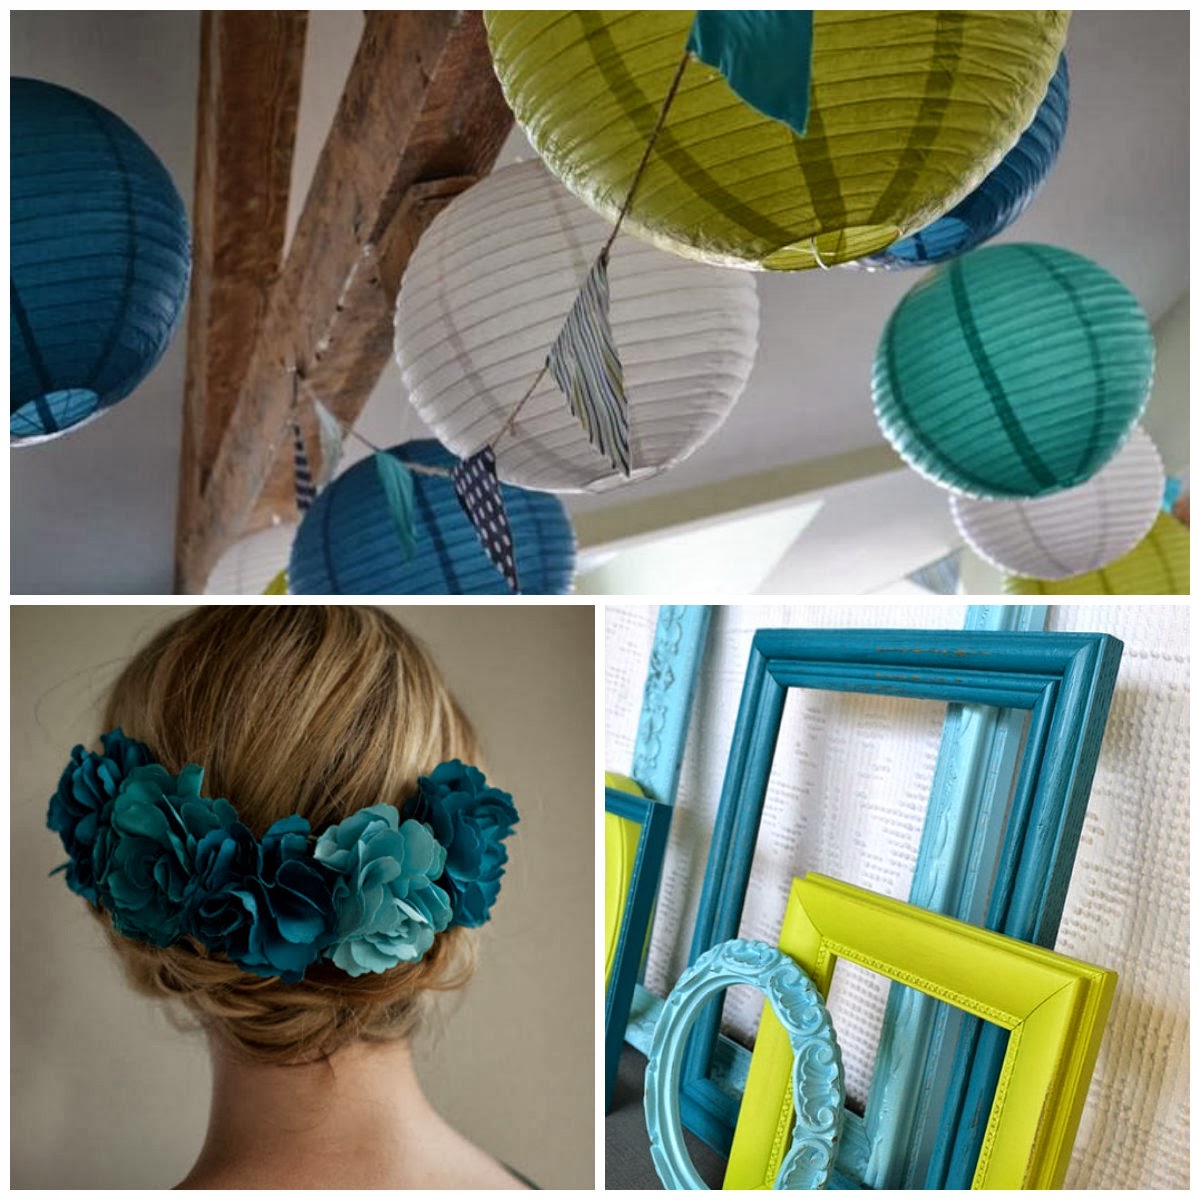 Event Soiree: A Teal and Lime Green Wedding Inspiration